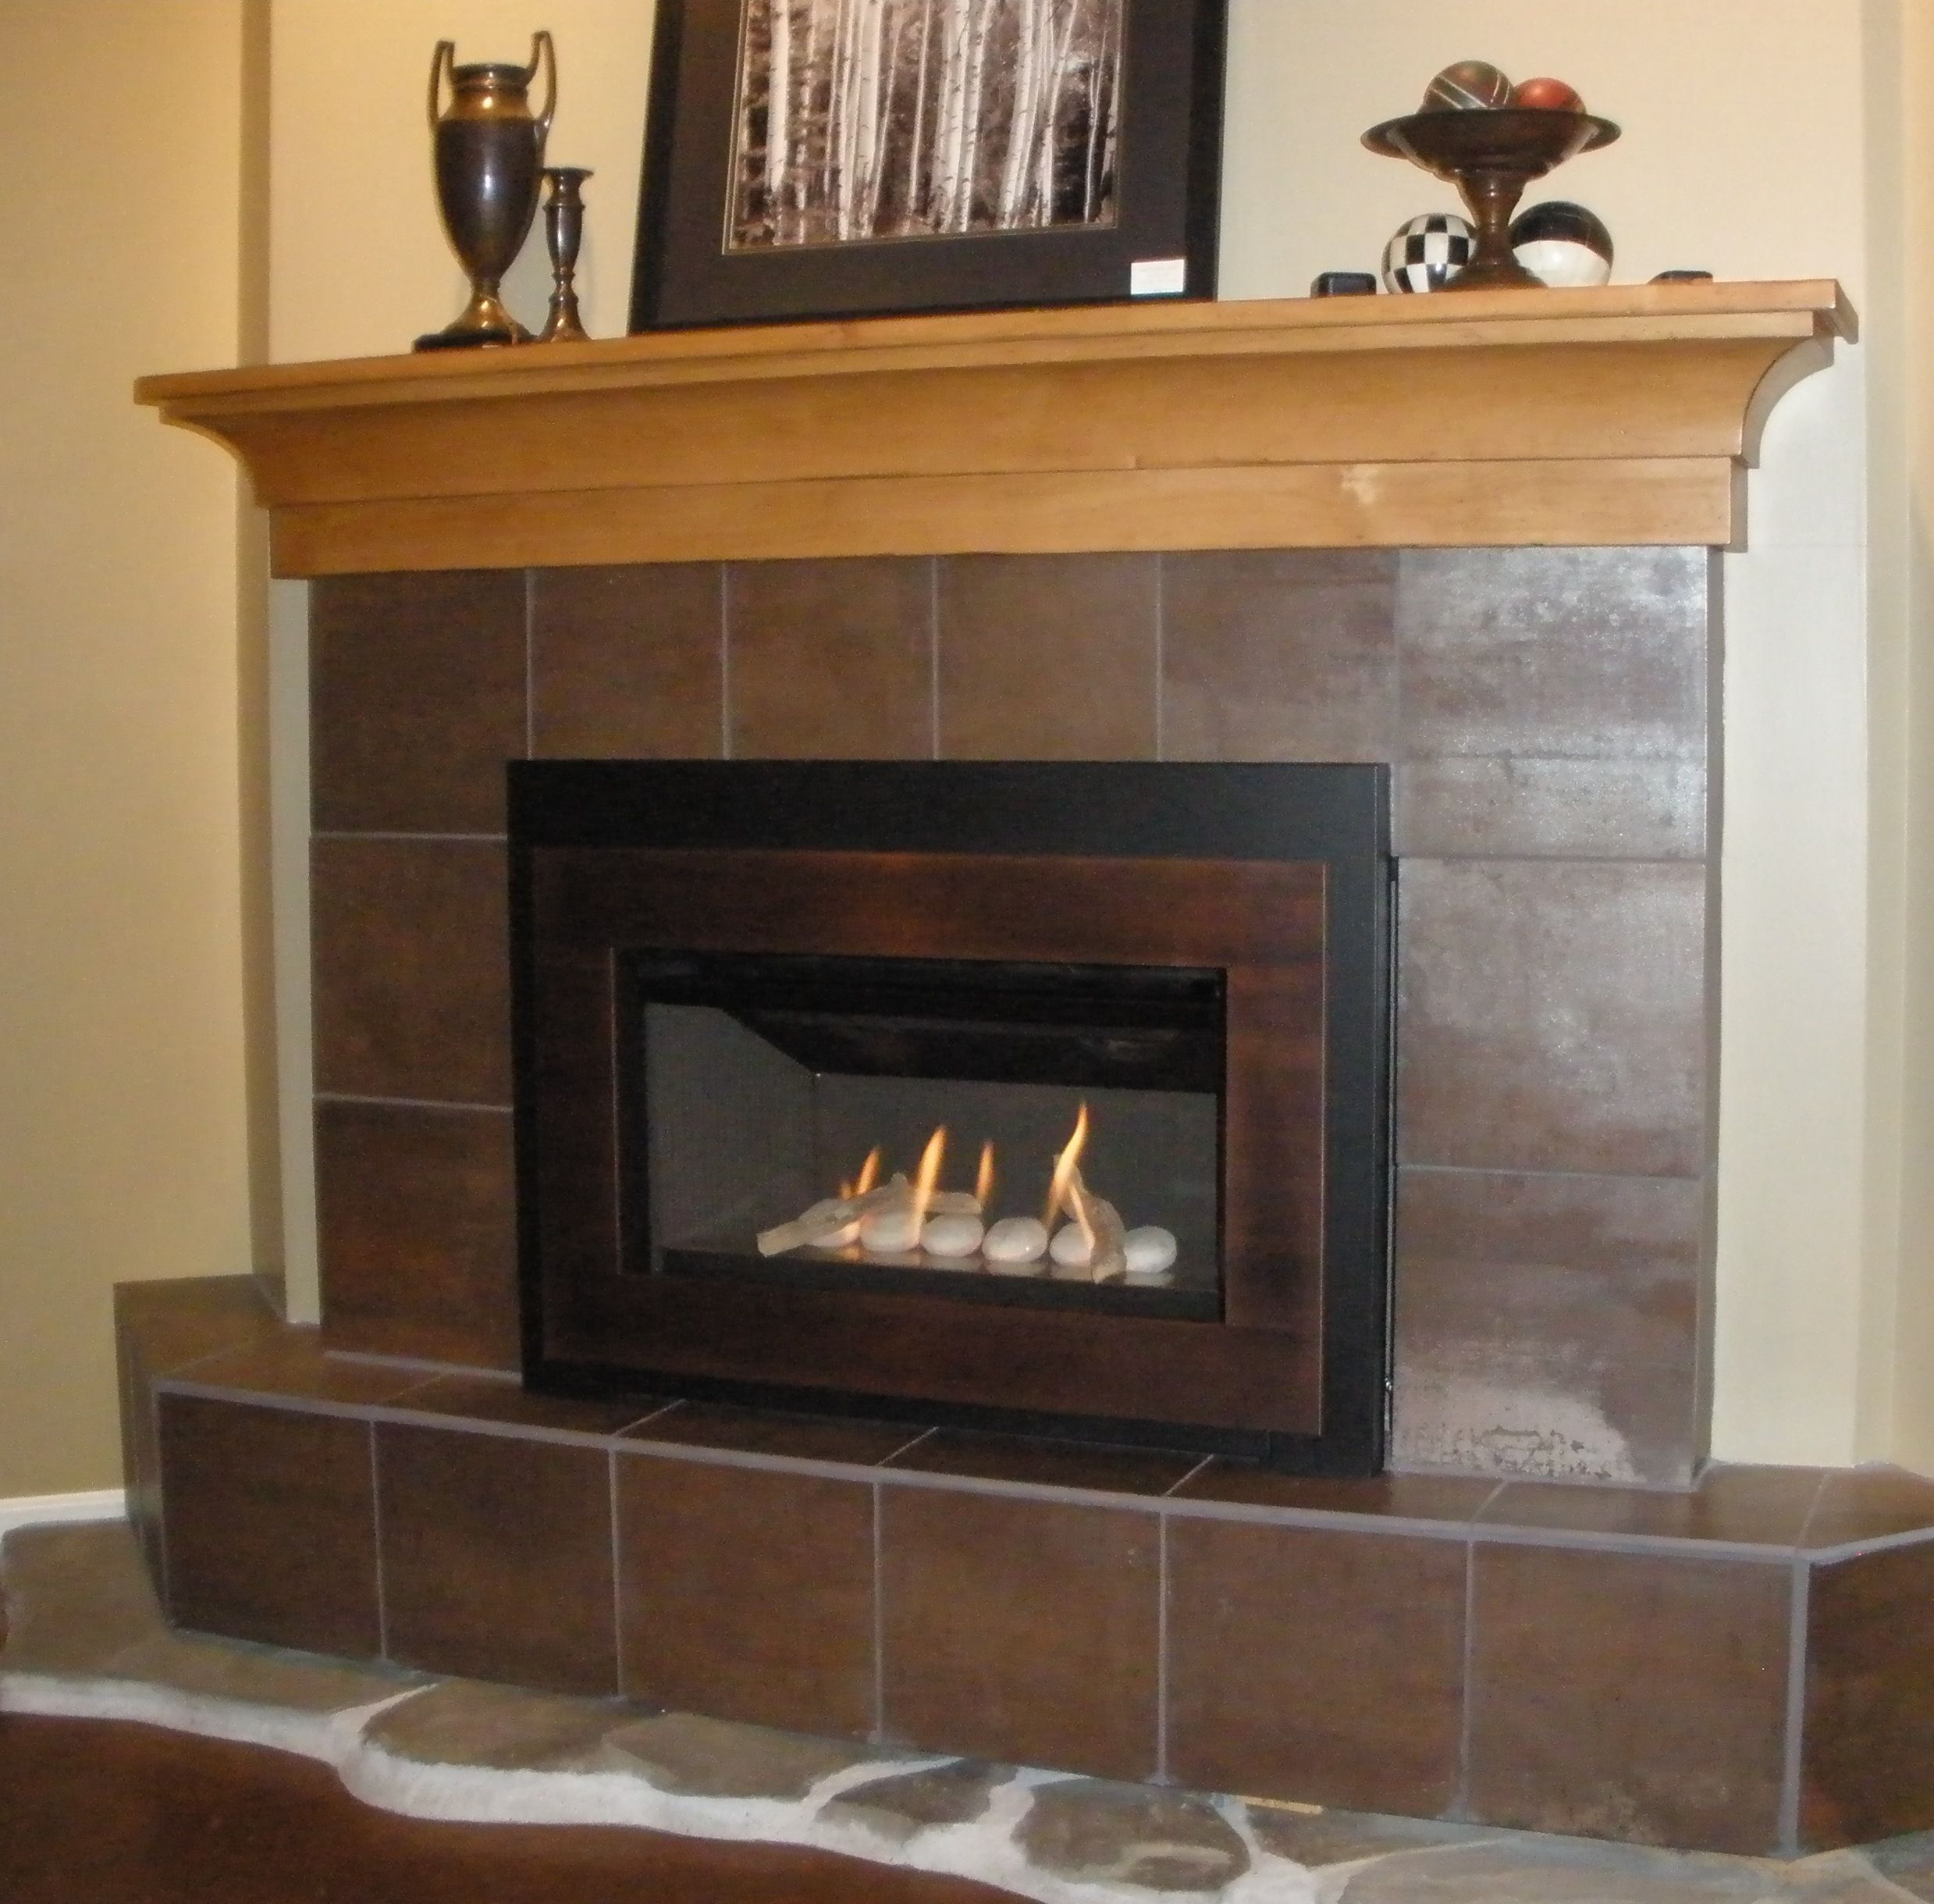 How to Clean A Gas Fireplace Awesome Pin On Valor Radiant Gas Fireplaces Midwest Dealer